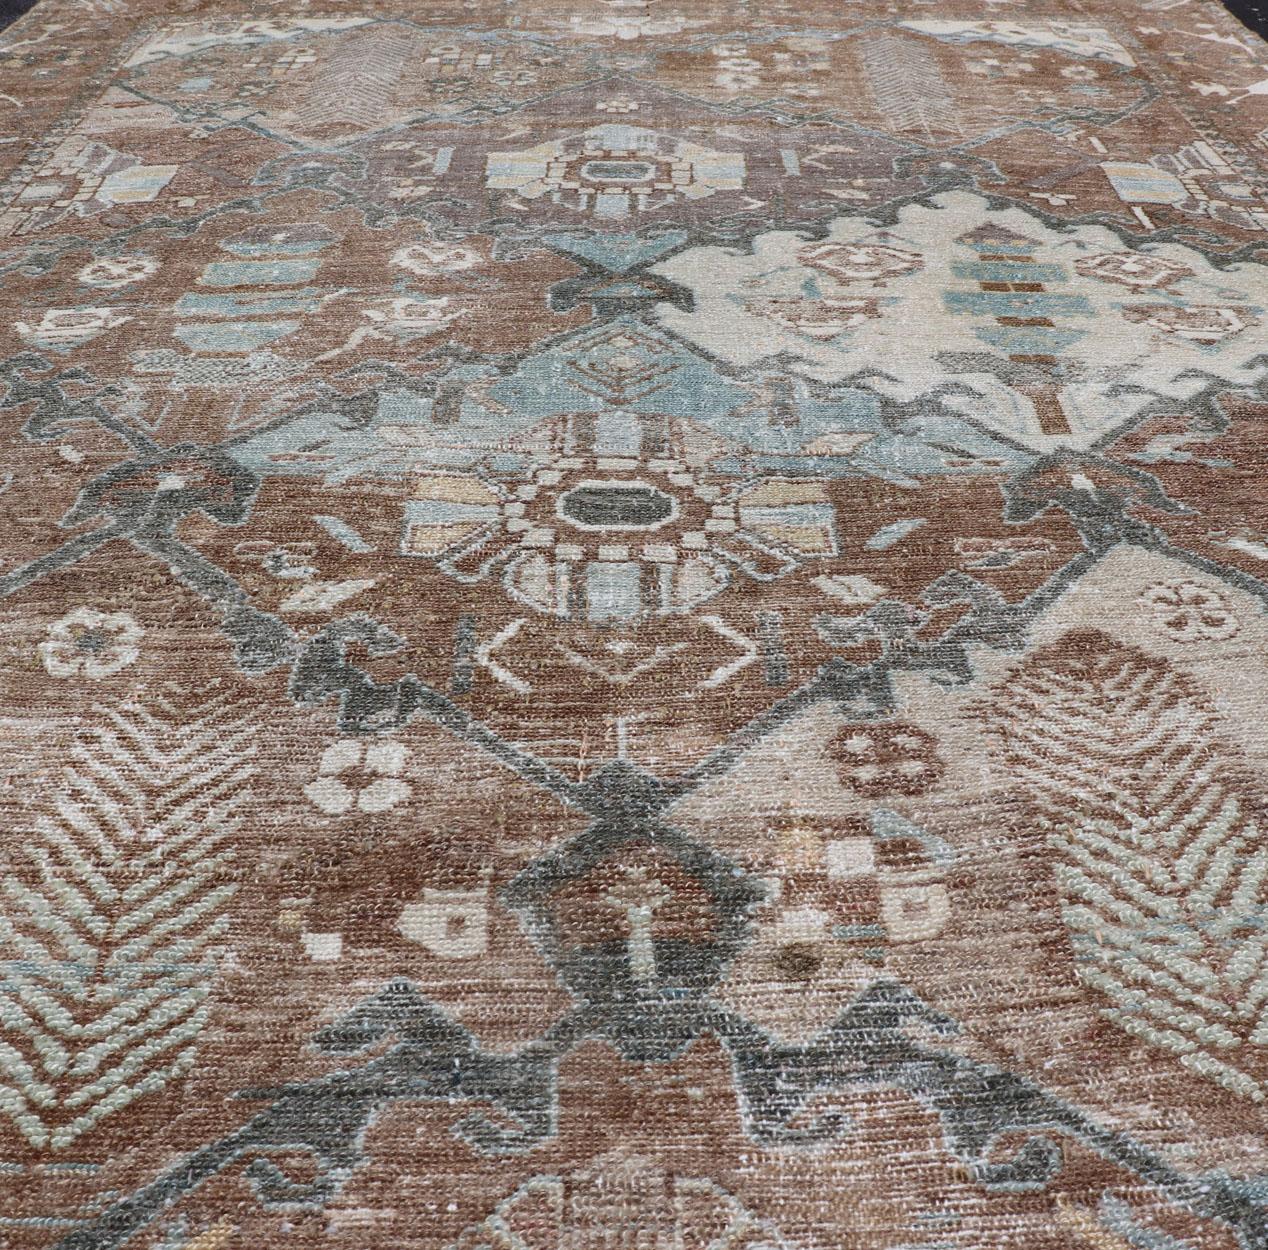 Wool Antique Persian Bakhitari Rug with All-Over Patten in Earthy and Brown Tones